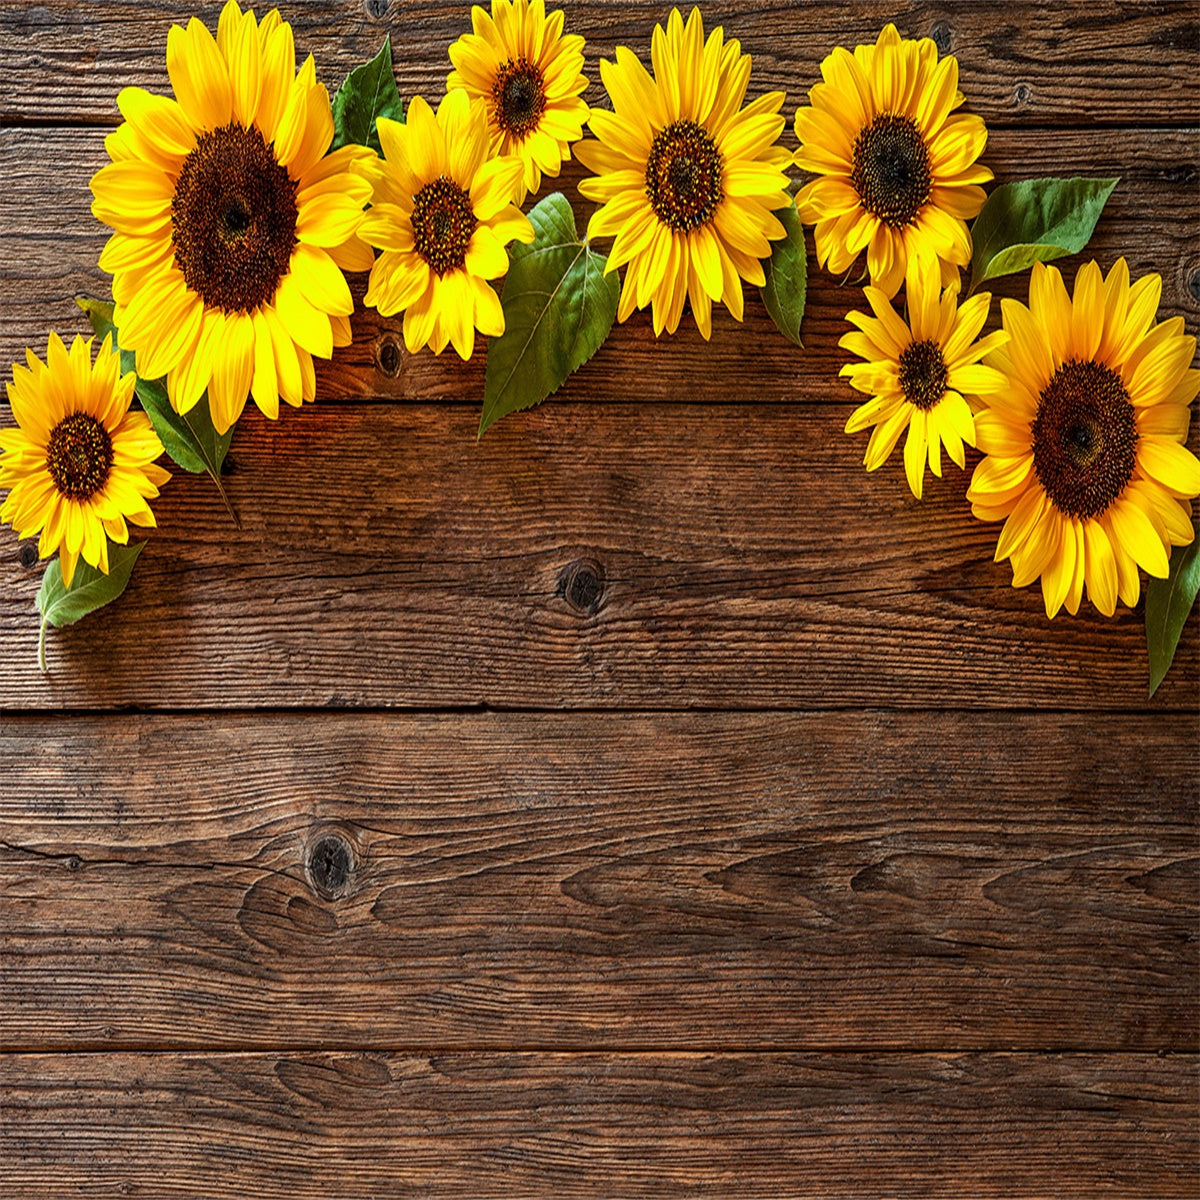 Sunflower Wood Floor wall Texture Backdrop Photography Backgrounds